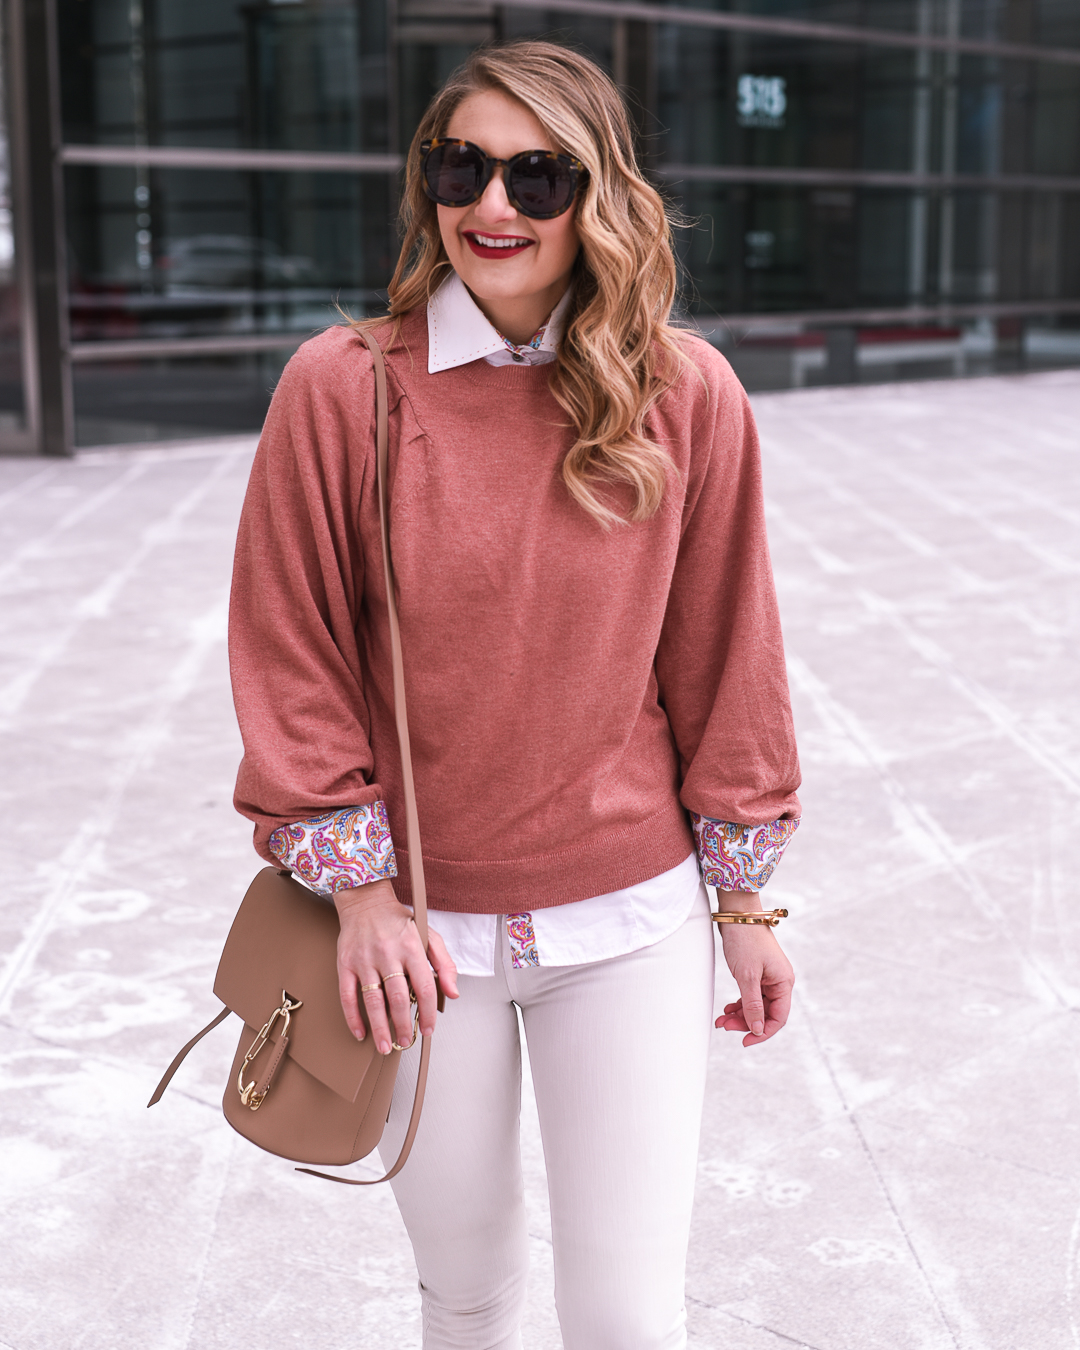 Leith Blouson Sleeve Sweater in Coral from Nordstrom  - Stylish Office Outfits by popular Chicago fashion blogger Visions of Vogue